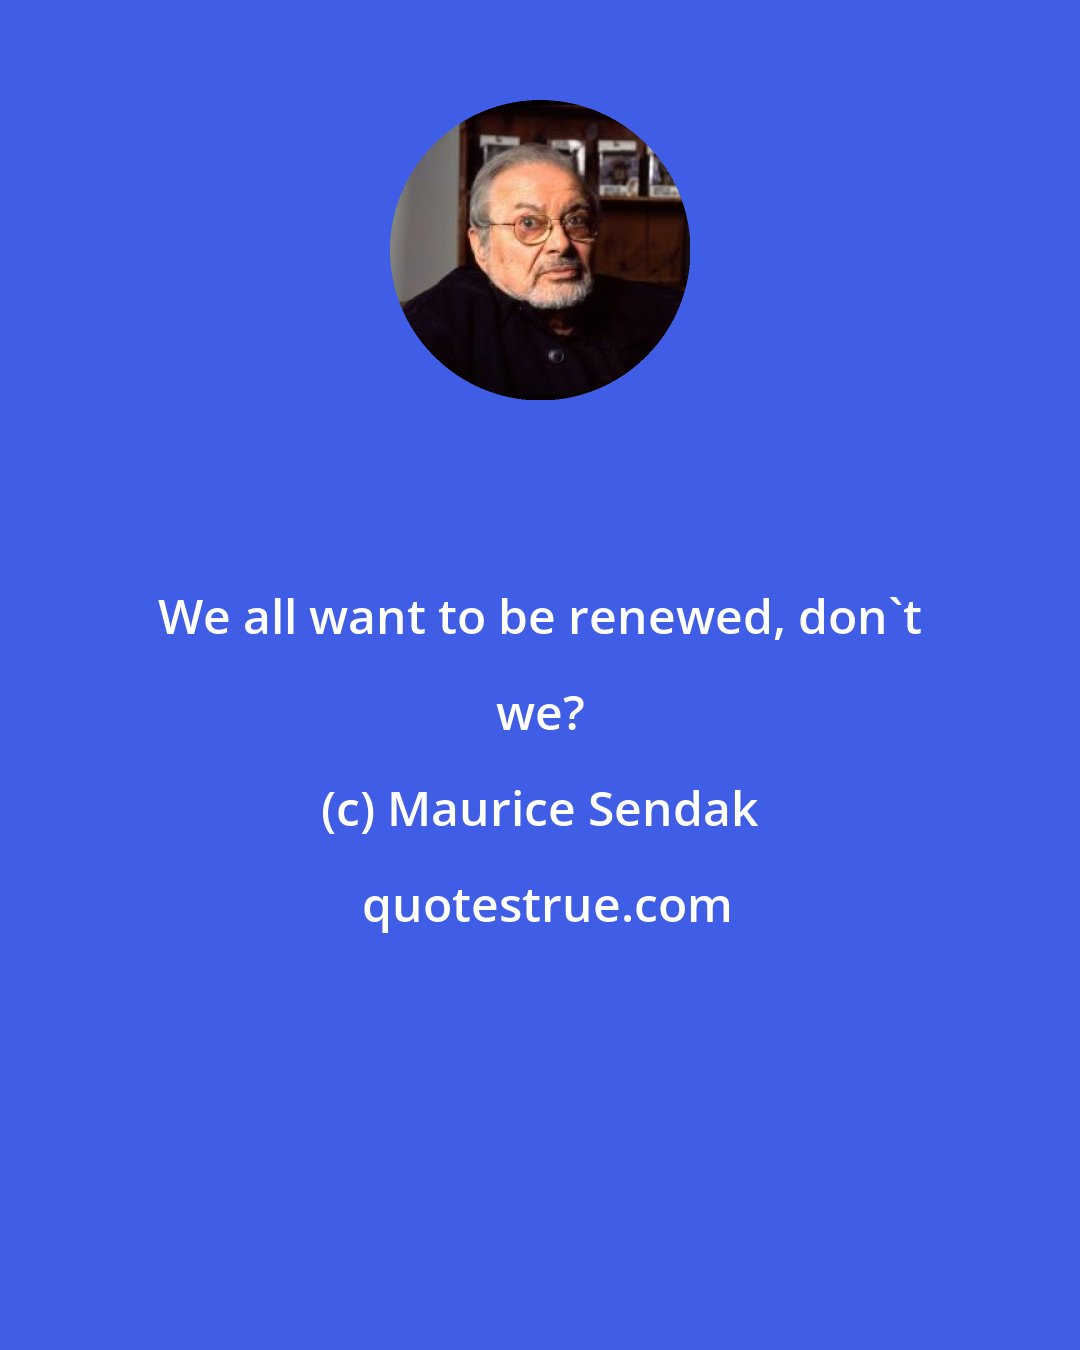 Maurice Sendak: We all want to be renewed, don't we?